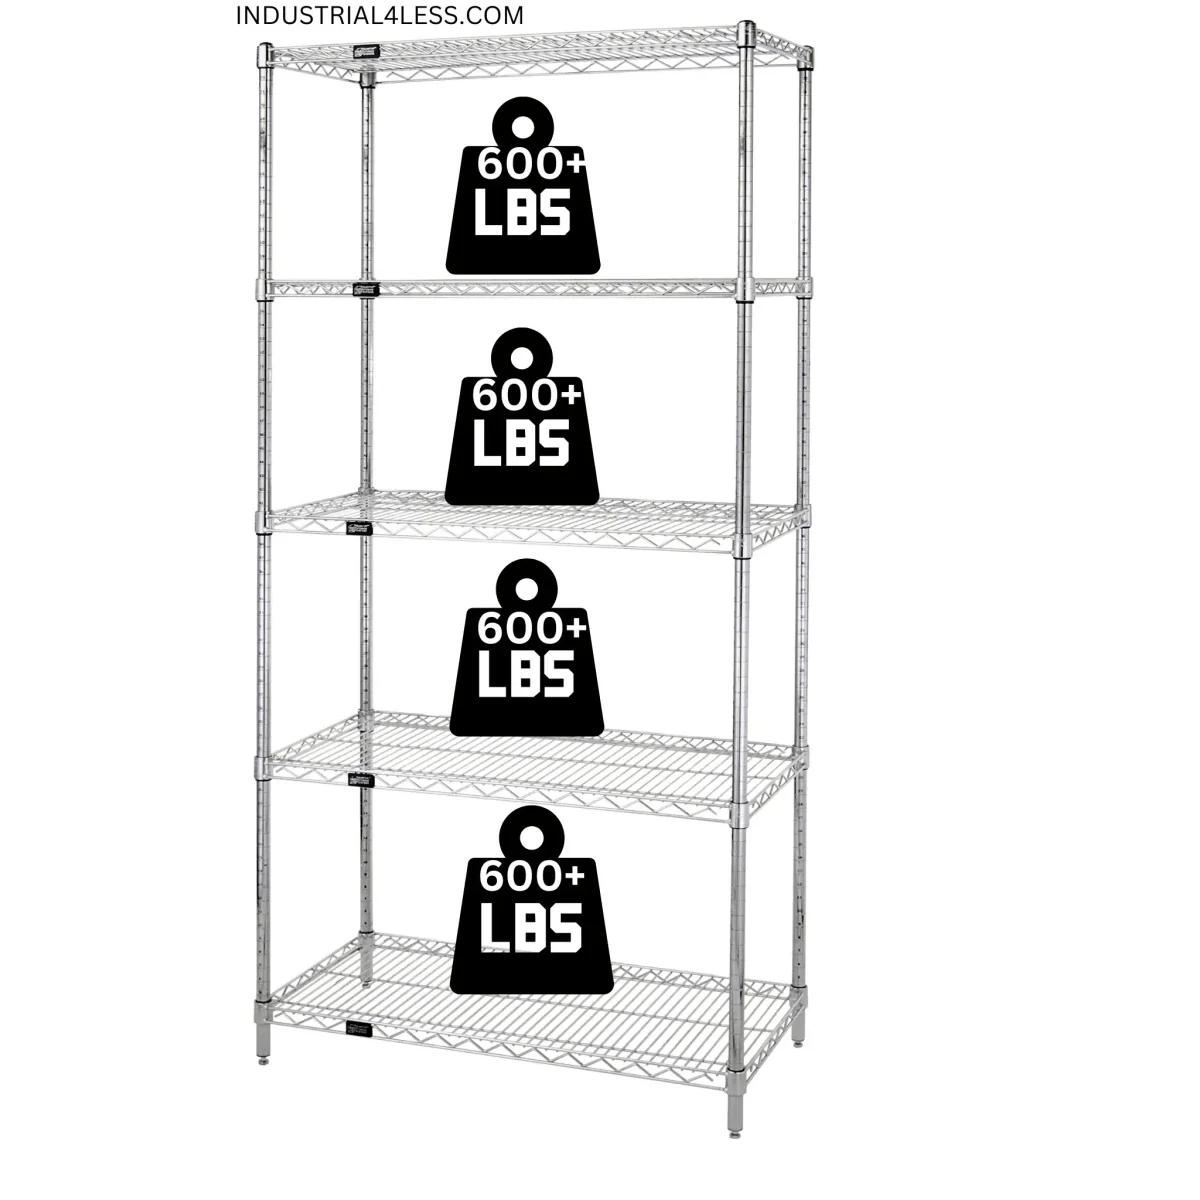 14" x 72" Stainless Steel Wire Shelving Unit - Industrial 4 Less - 14725S-5